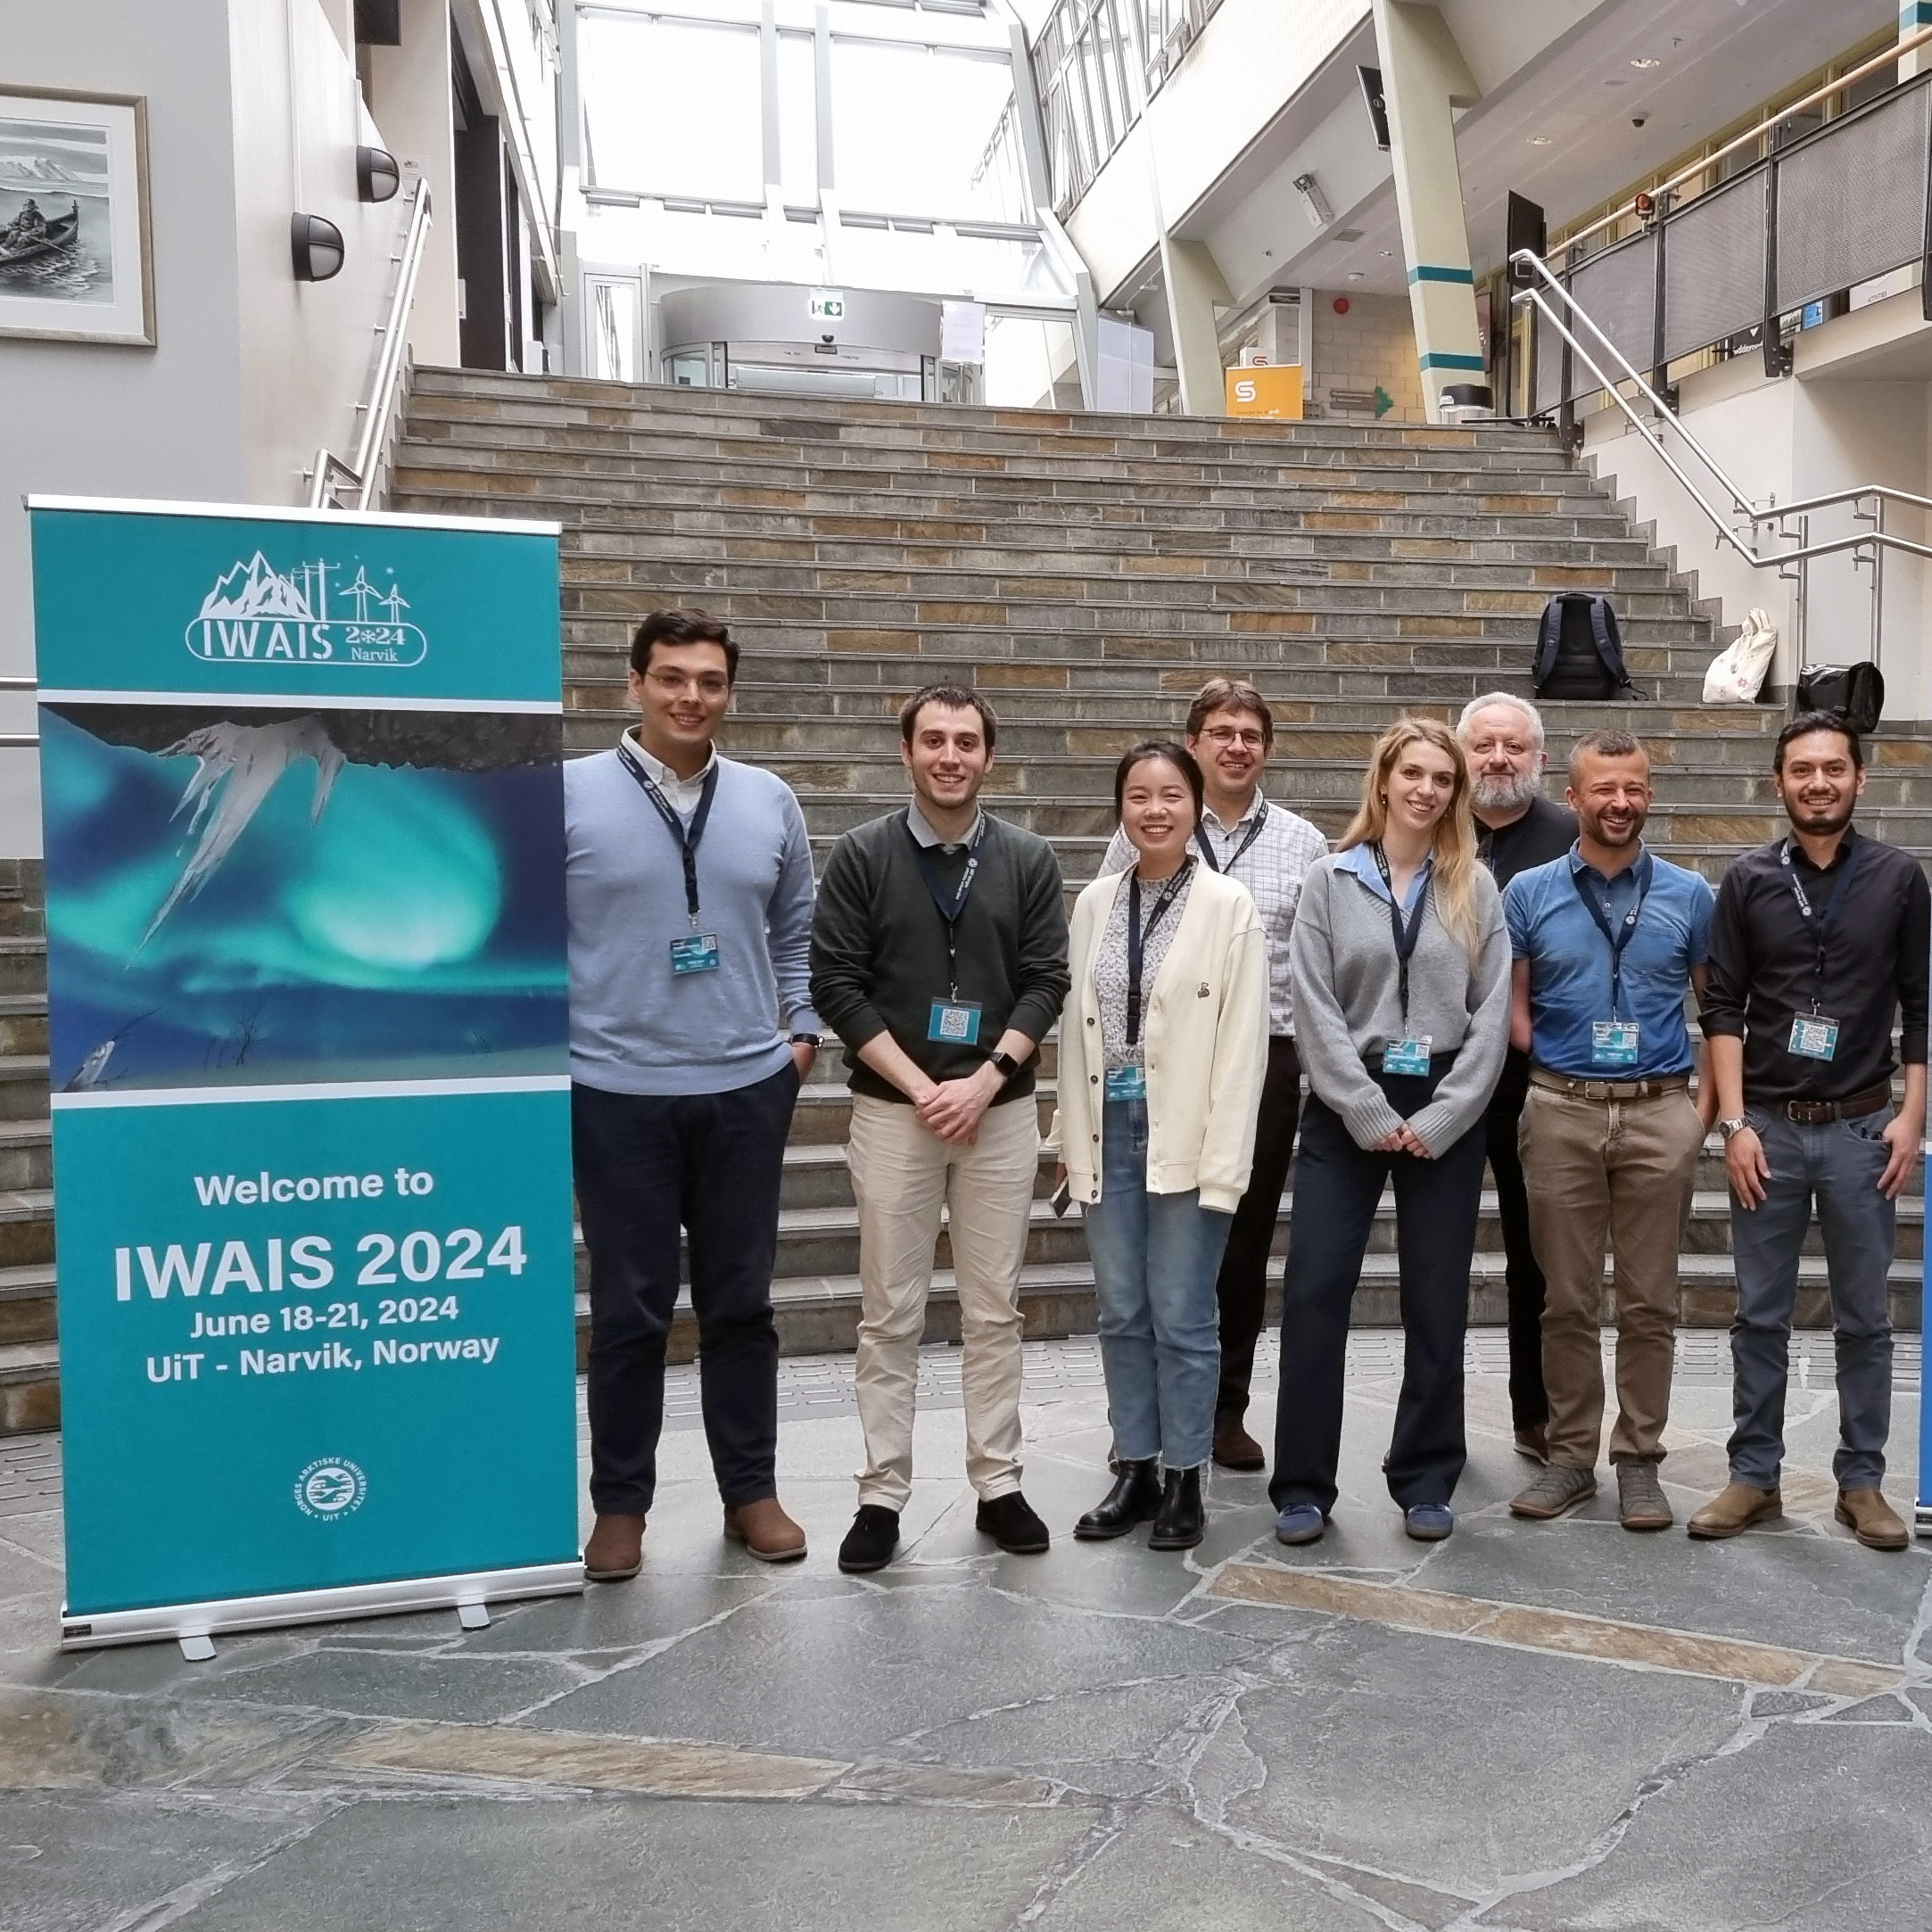 SURFICE team participated in IWAIS 2024 conference in Norway